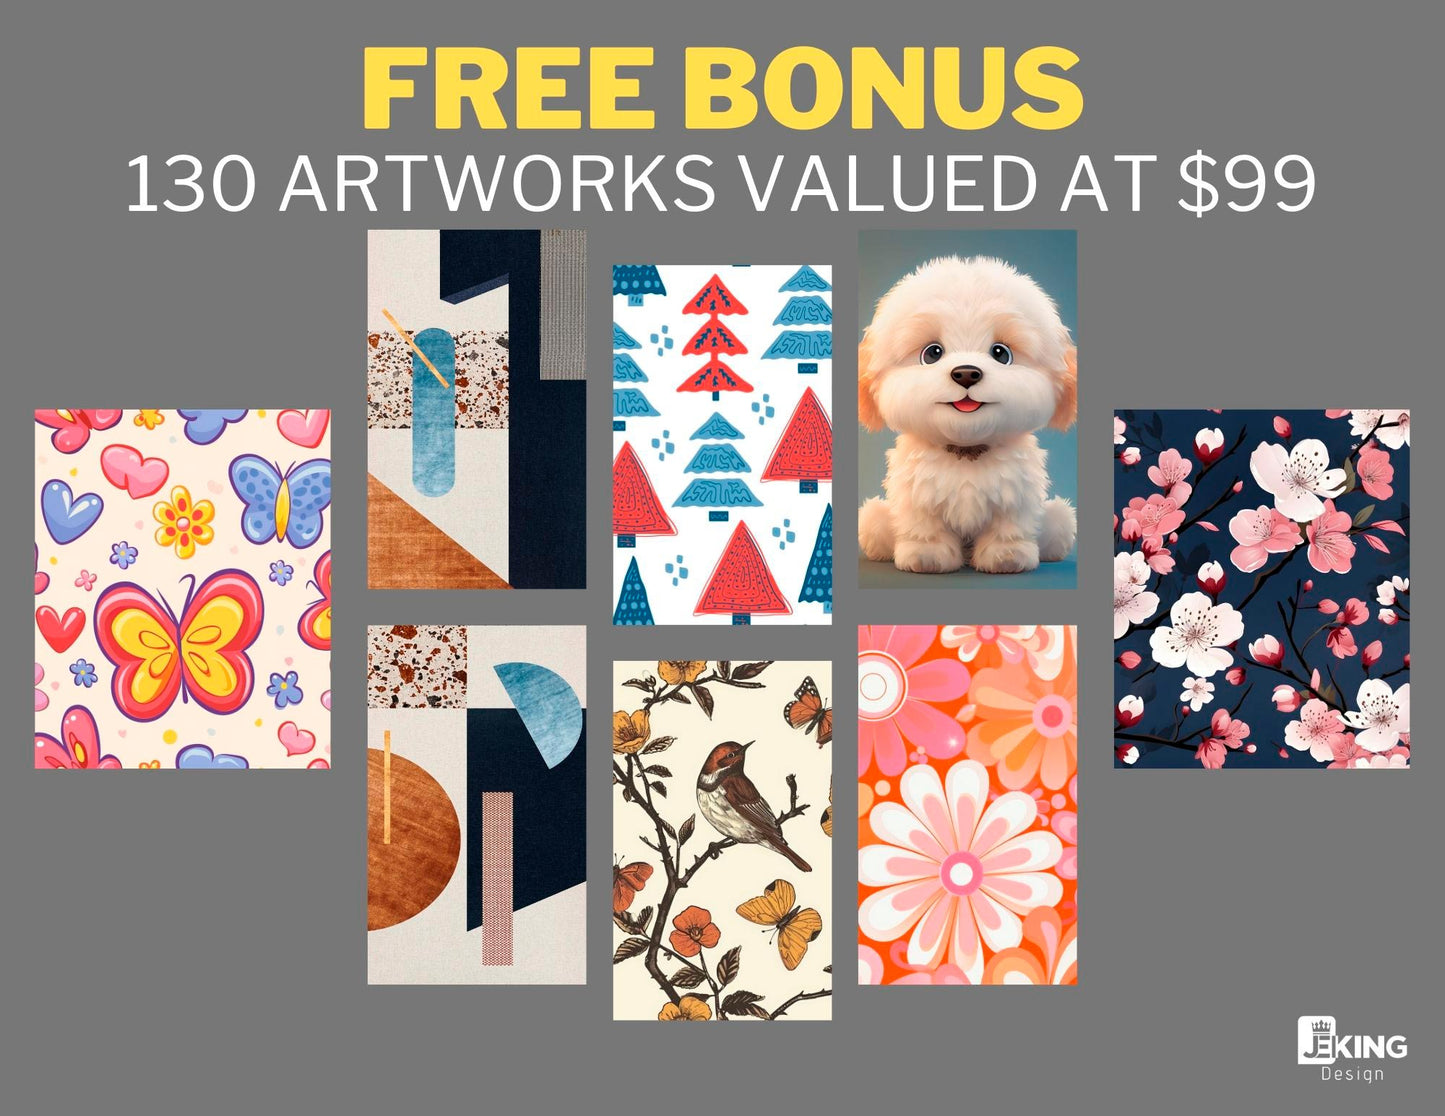 Divine Abundance Prints + Free Bonus Valued at $99: Purchase a Premium Digital Art Print – Experience the Excellence of Our High-Resolution PNG and PDF Artworks, Perfectly Suited for Home and Office Decor.